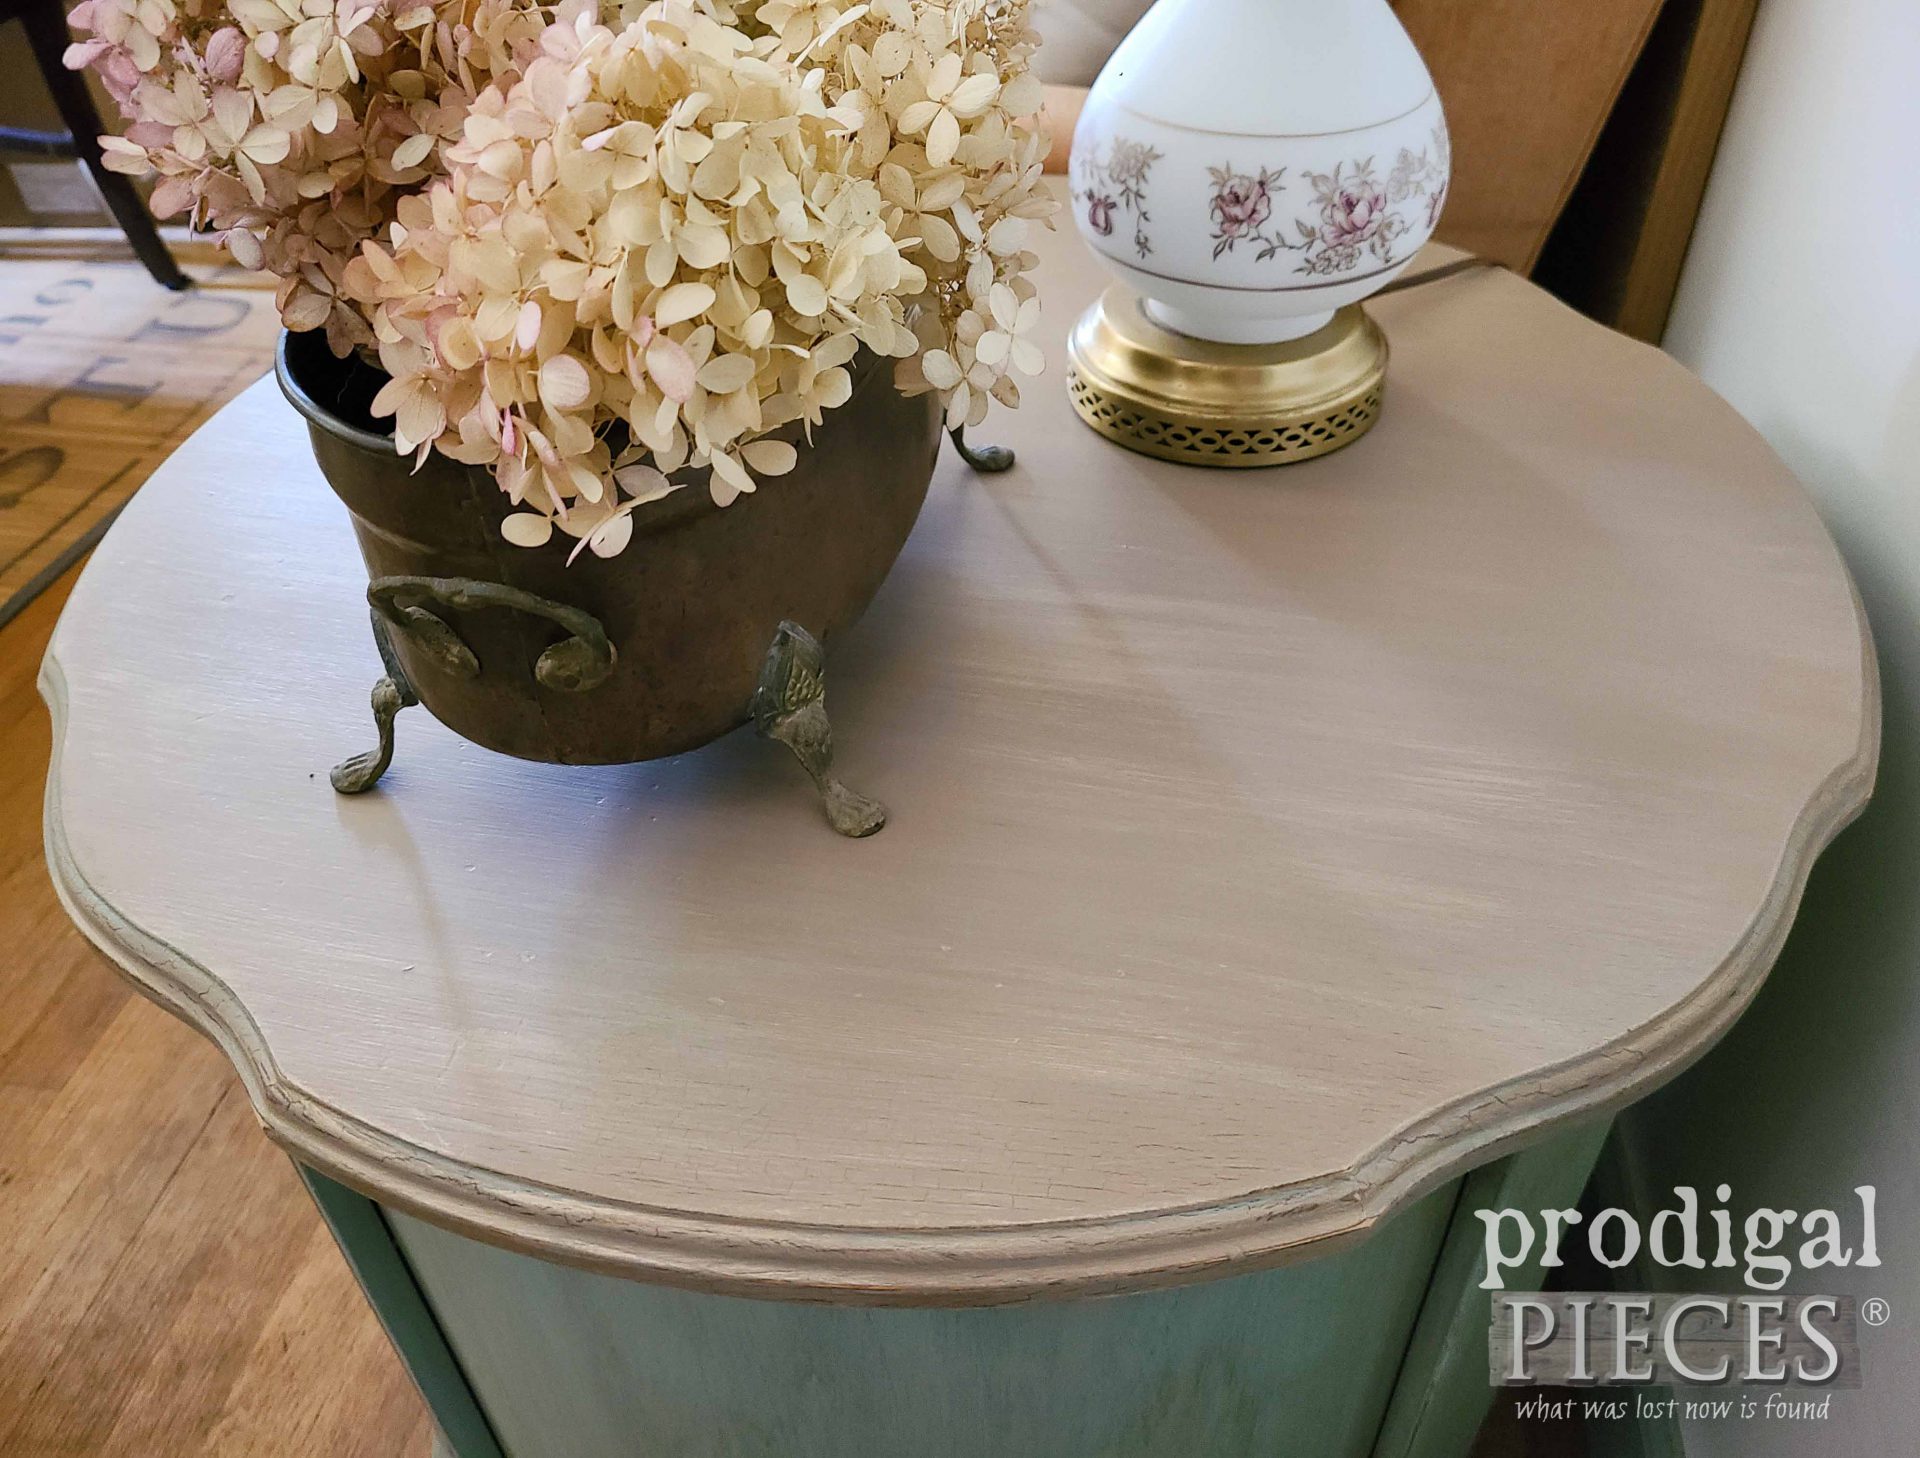 Mersman Side Table Top Gilded with Metallic Paint by Larissa of Prodigal Pieces | prodigalpieces.com #prodigalpieces #vintage #furniture #diy